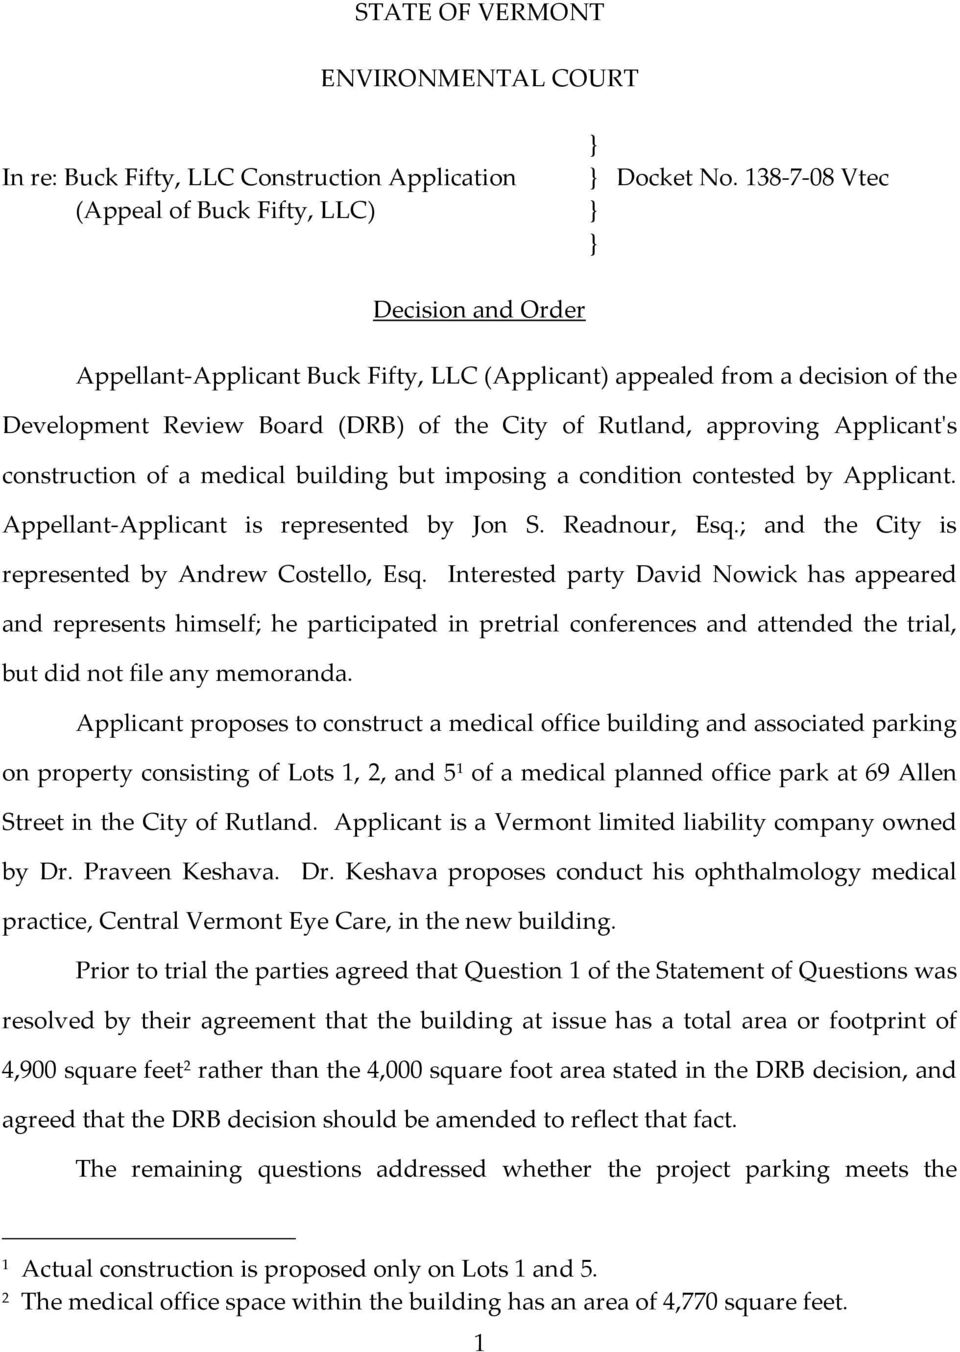 approving Applicant's construction of a medical building but imposing a condition contested by Applicant. Appellant-Applicant is represented by Jon S. Readnour, Esq.